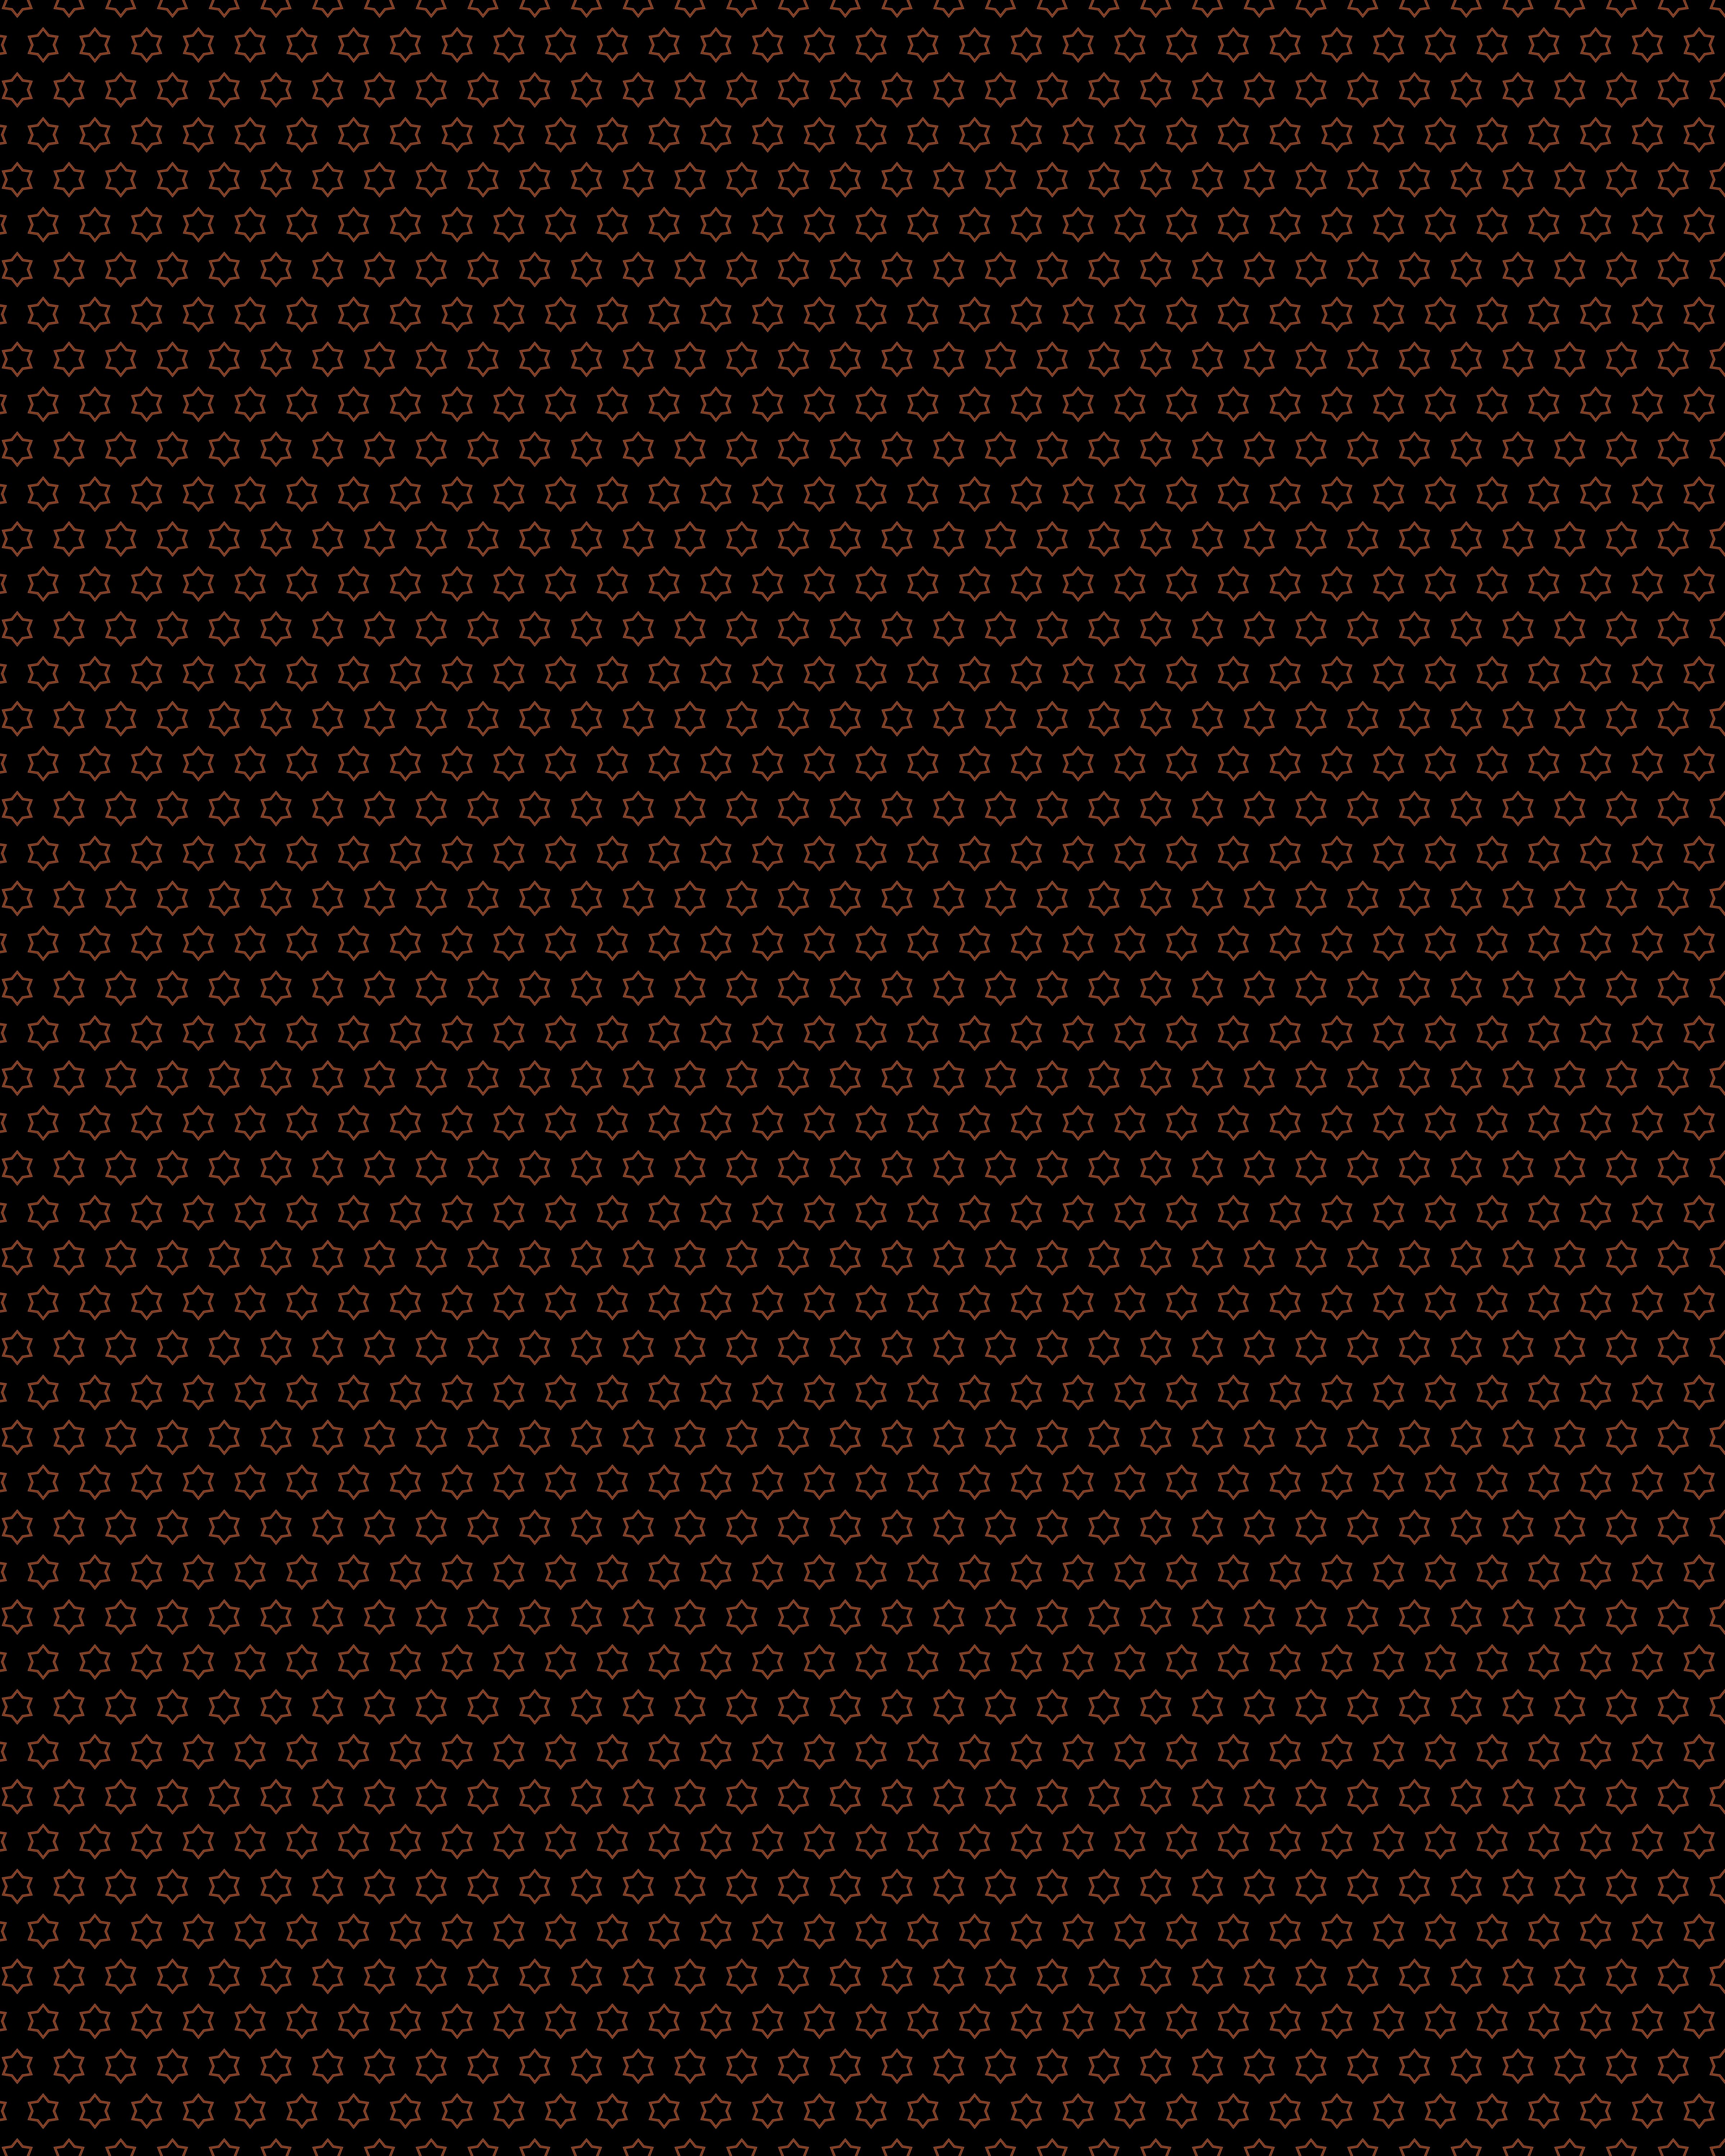 black background, geometric, stars, pattern, texture, textures, brown, shallow, small mobile wallpaper